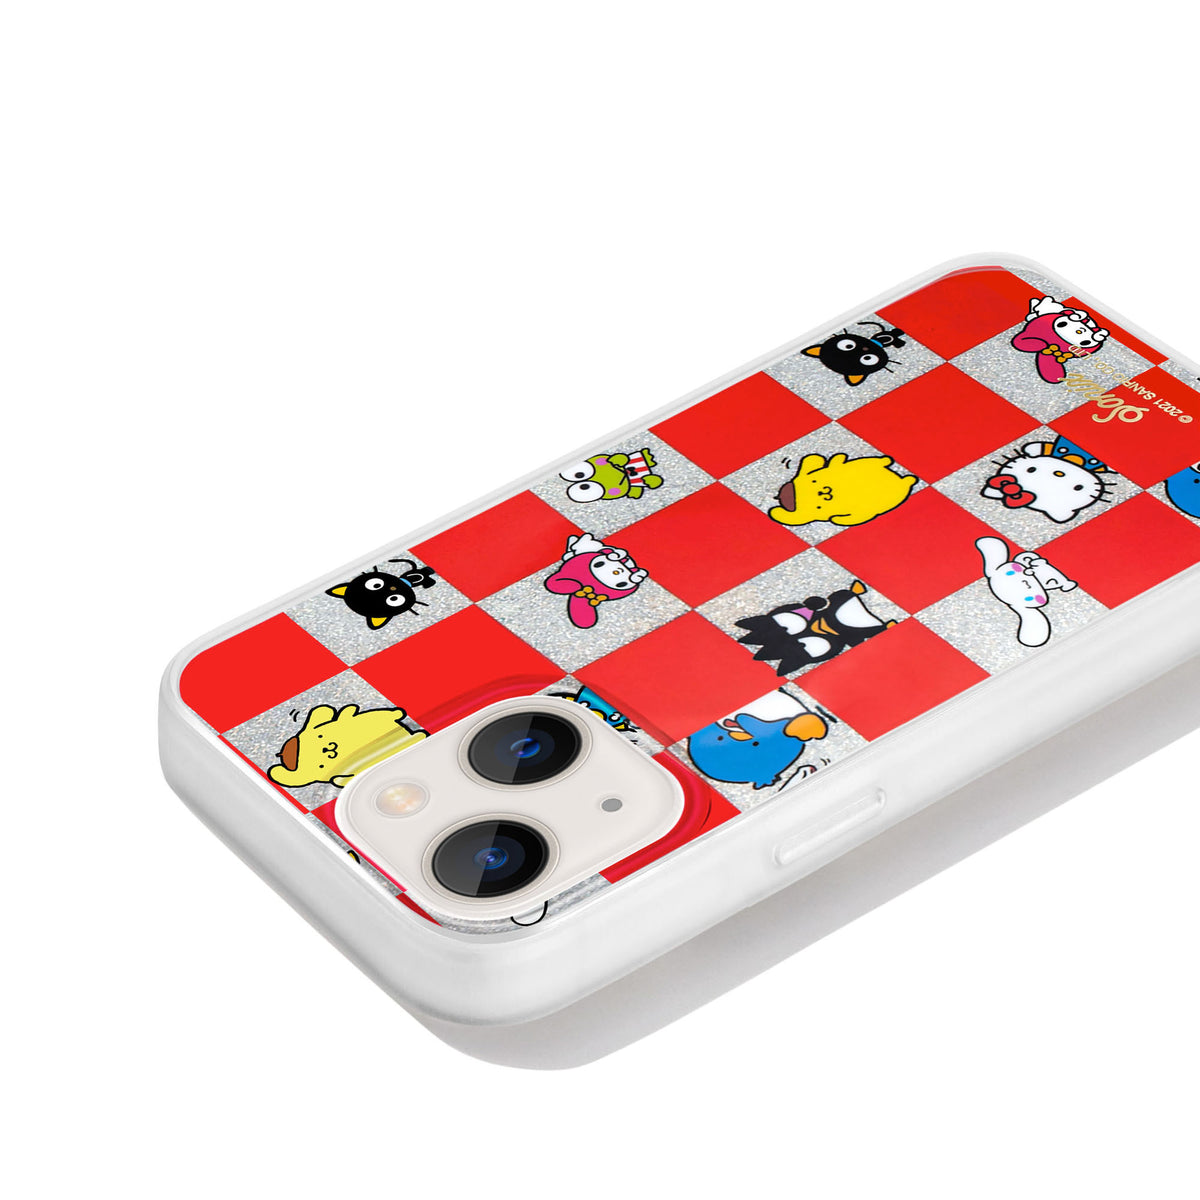 Checkered iPhone Cases to Match Your Personal Style